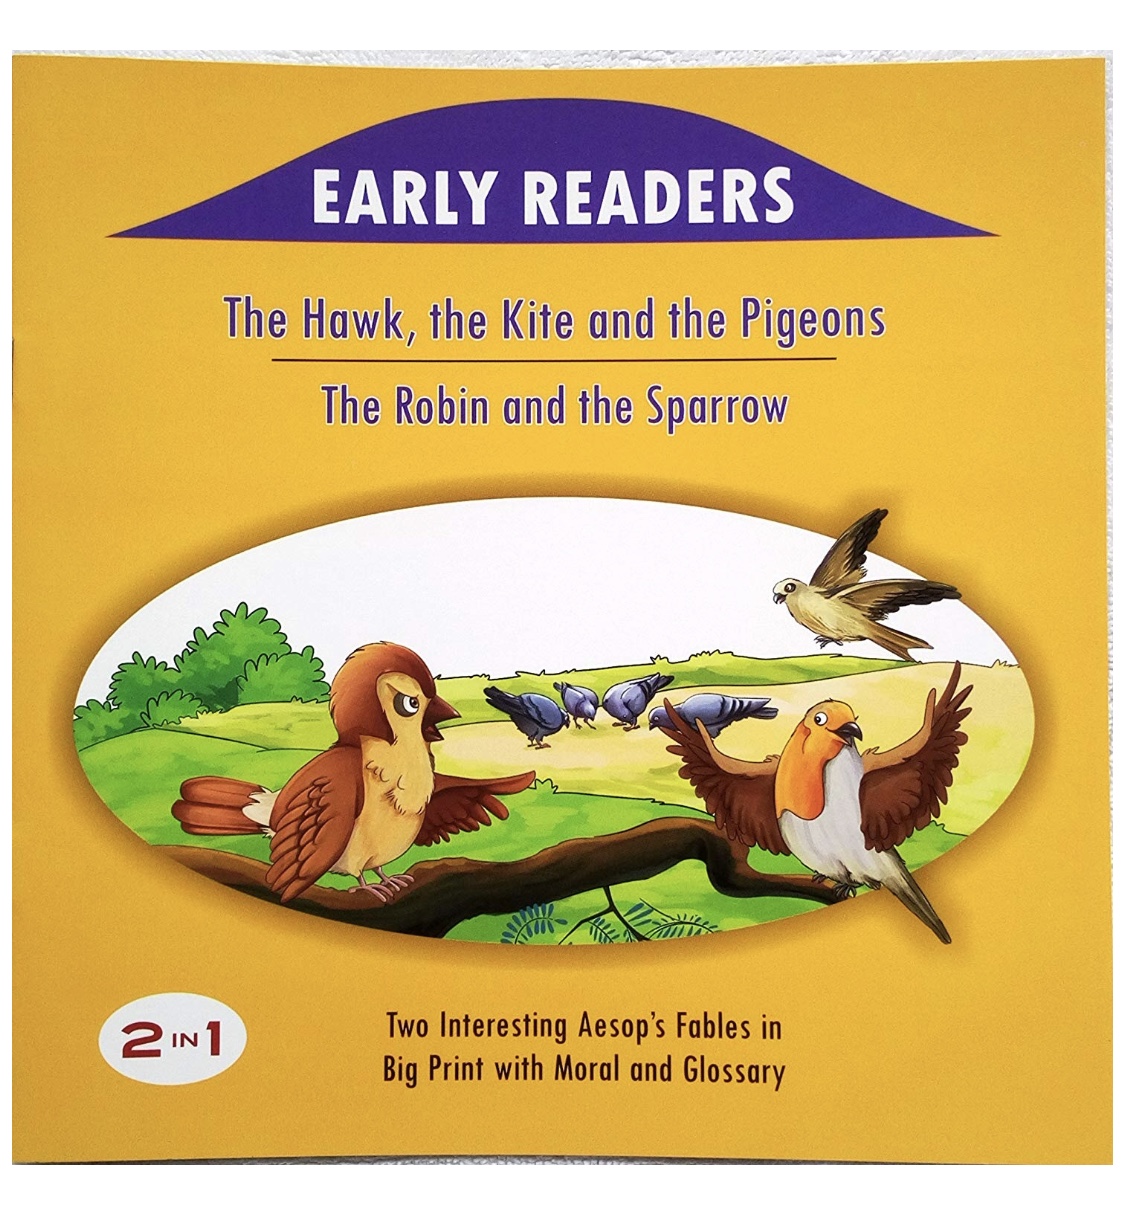 Early Readers 2 in 1 - The Hawk, Kite and the Pigeons /The Robin and the Sparrow